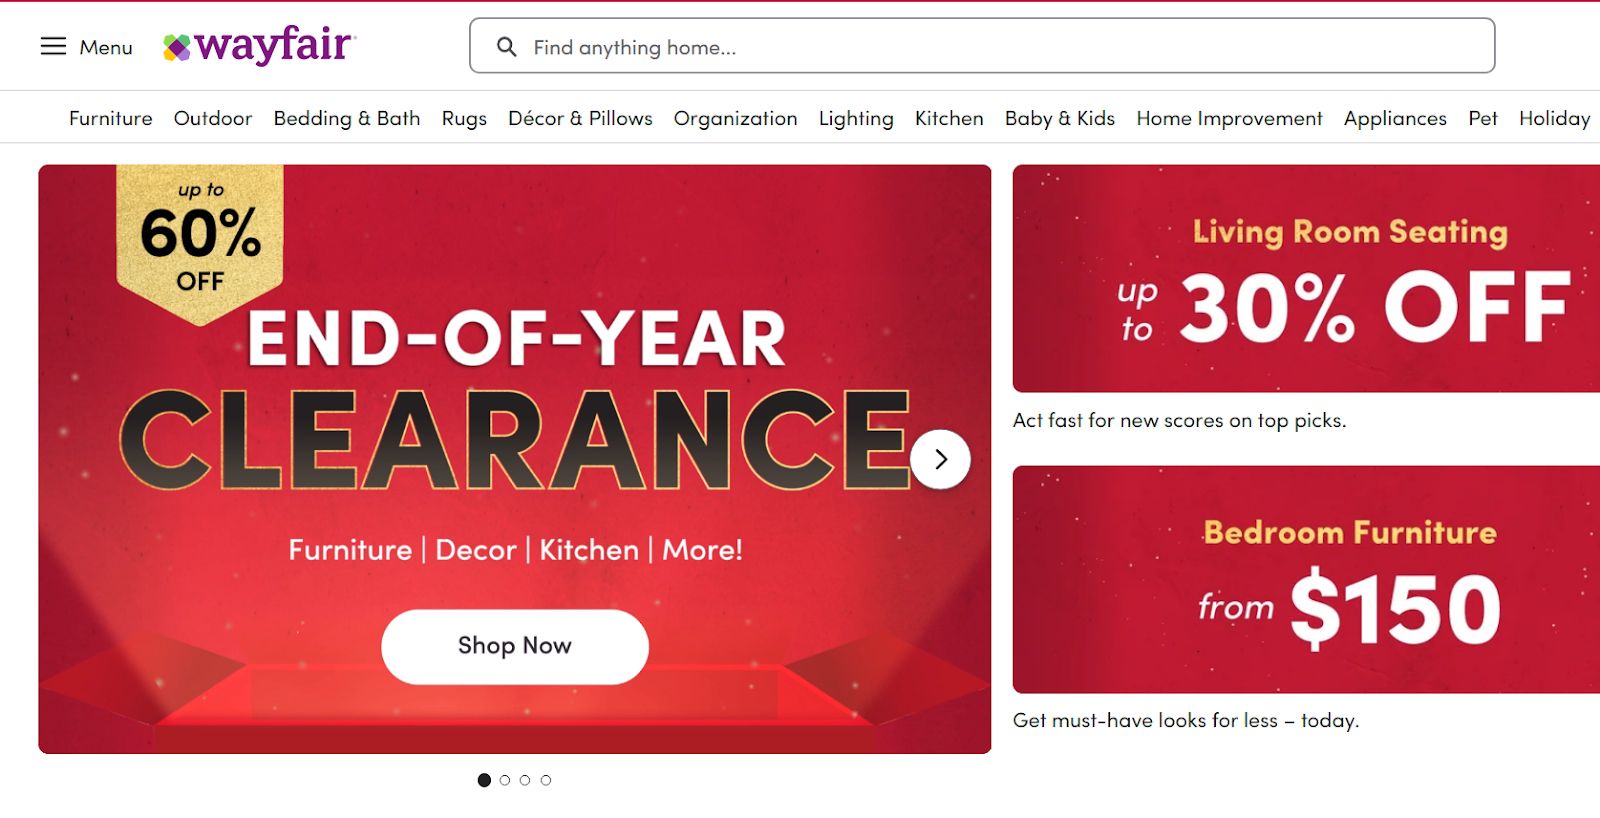 Screenshot of Wayfair’s prominent end-of-year clearance sales